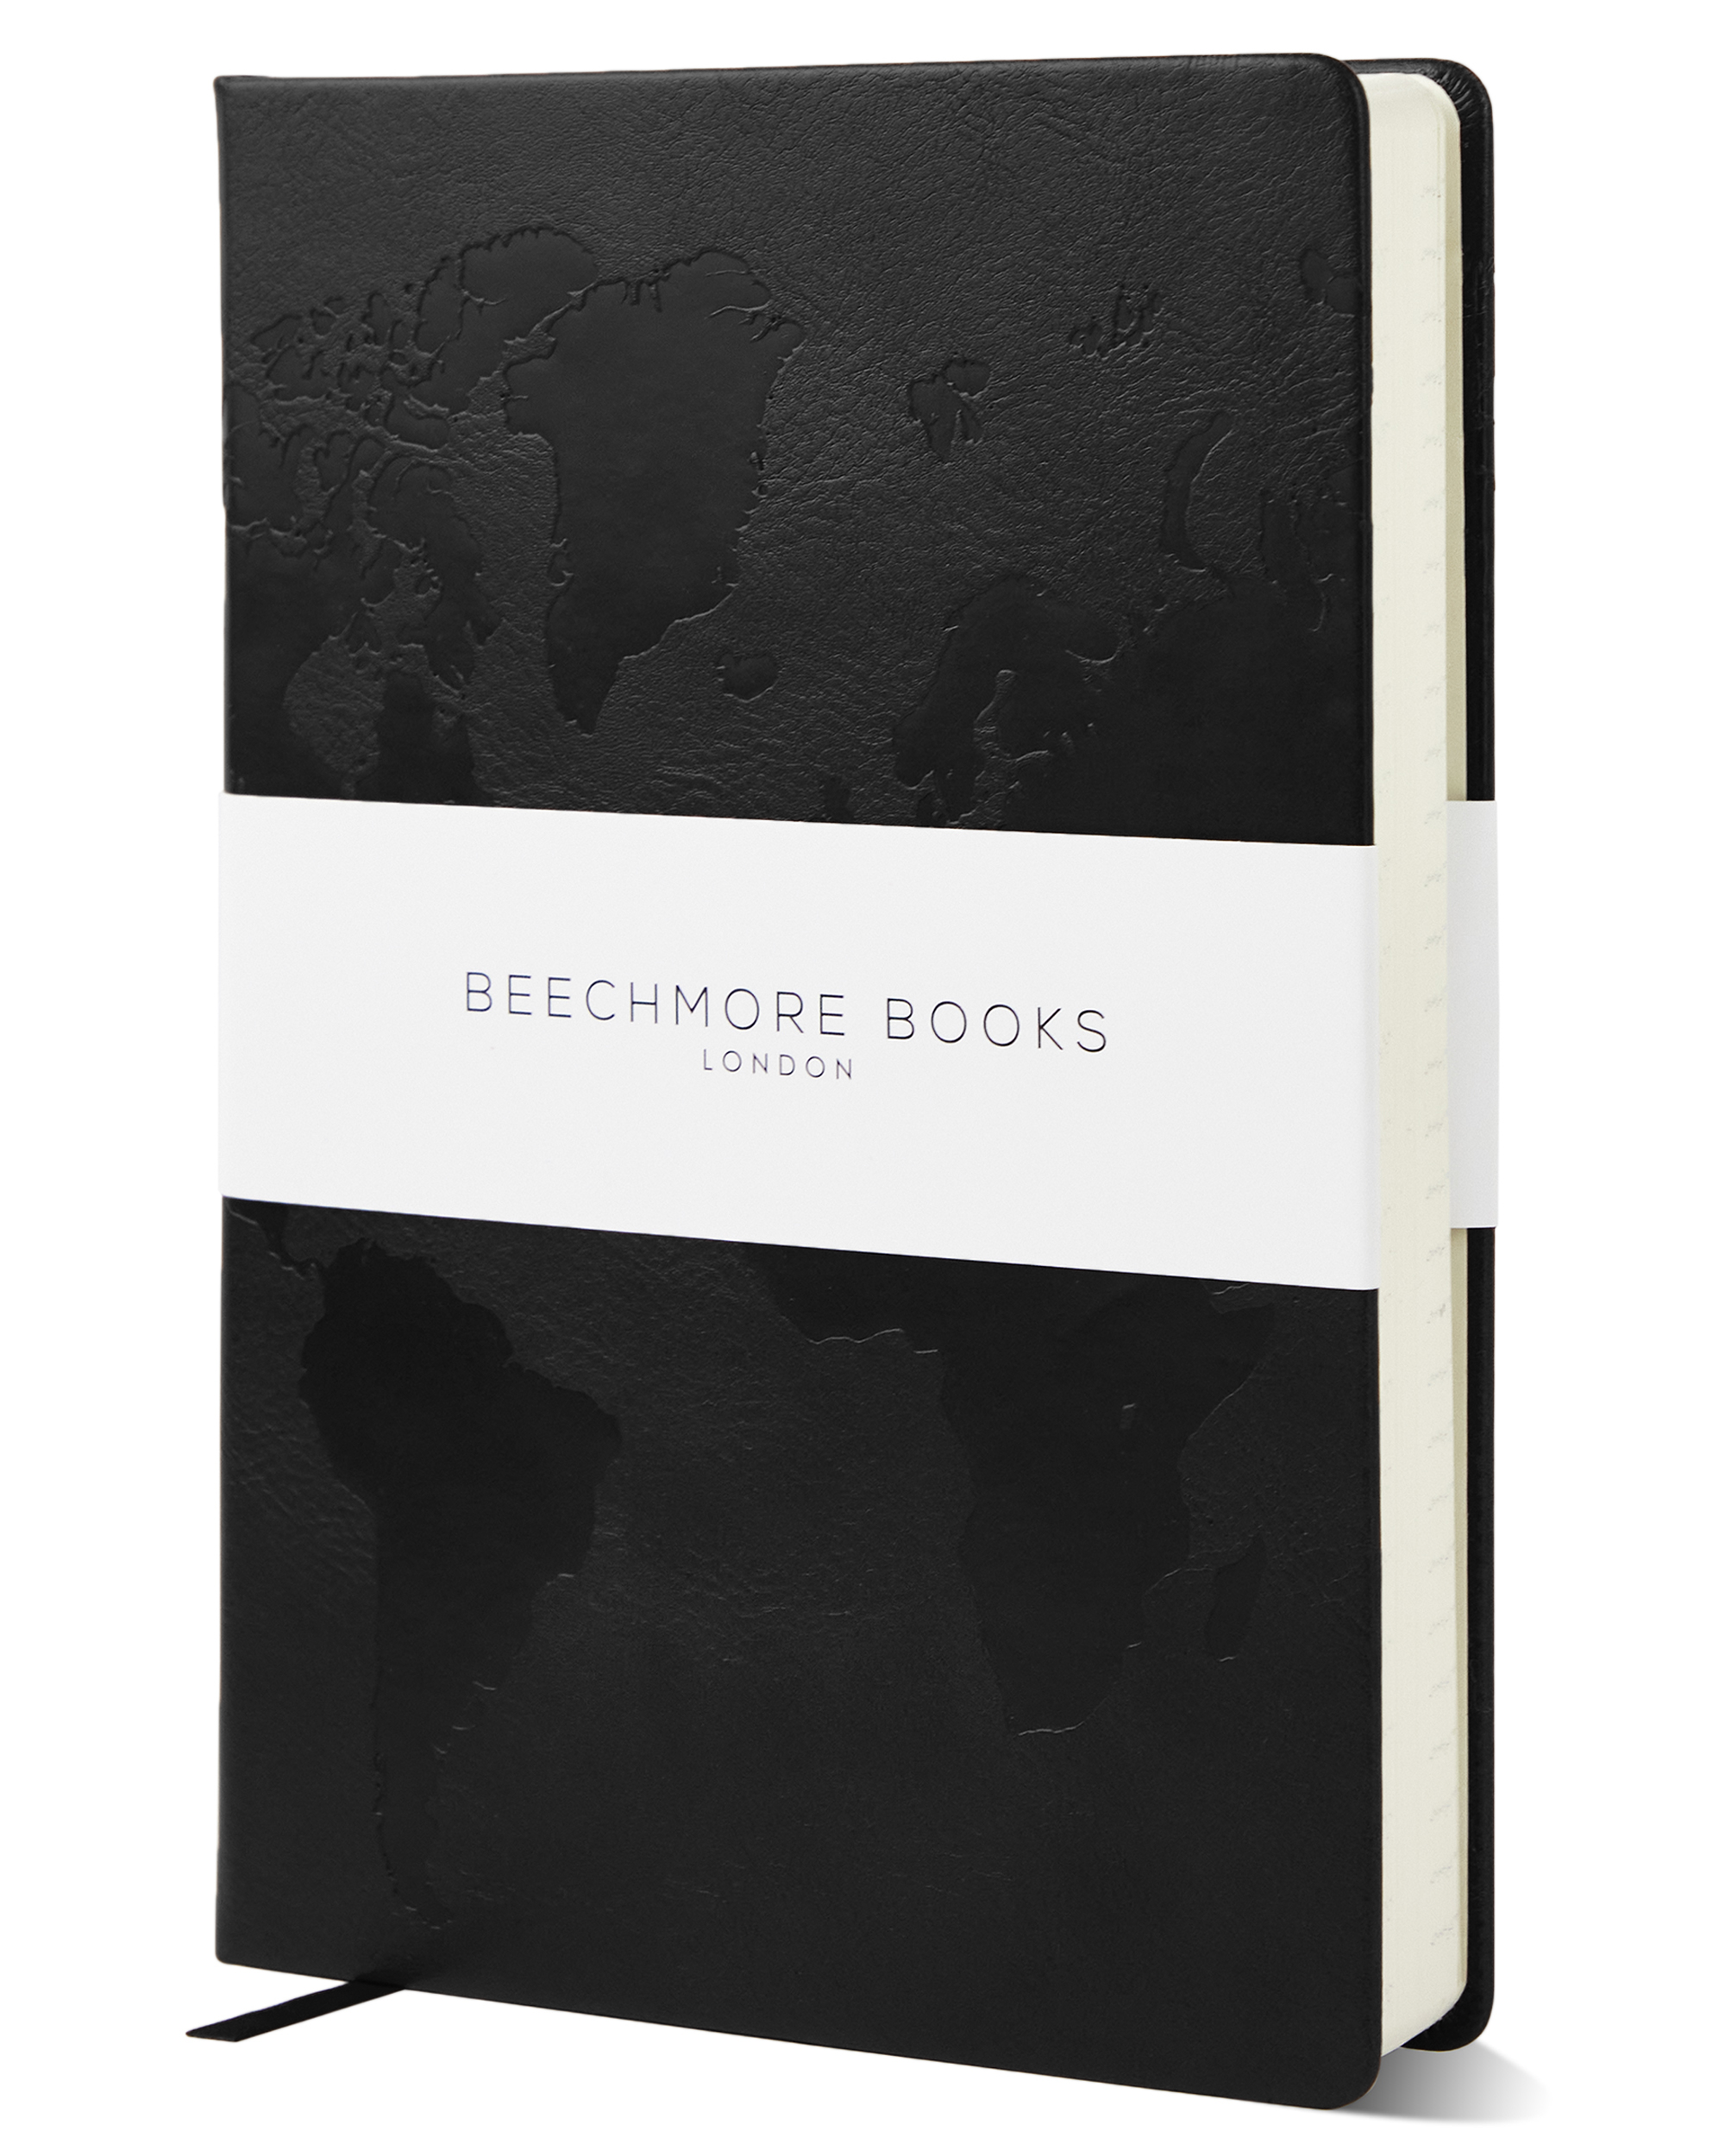 Sleek Charcoal Black A5 travel planner by Beechmore, perfect for sophisticated adventurers.